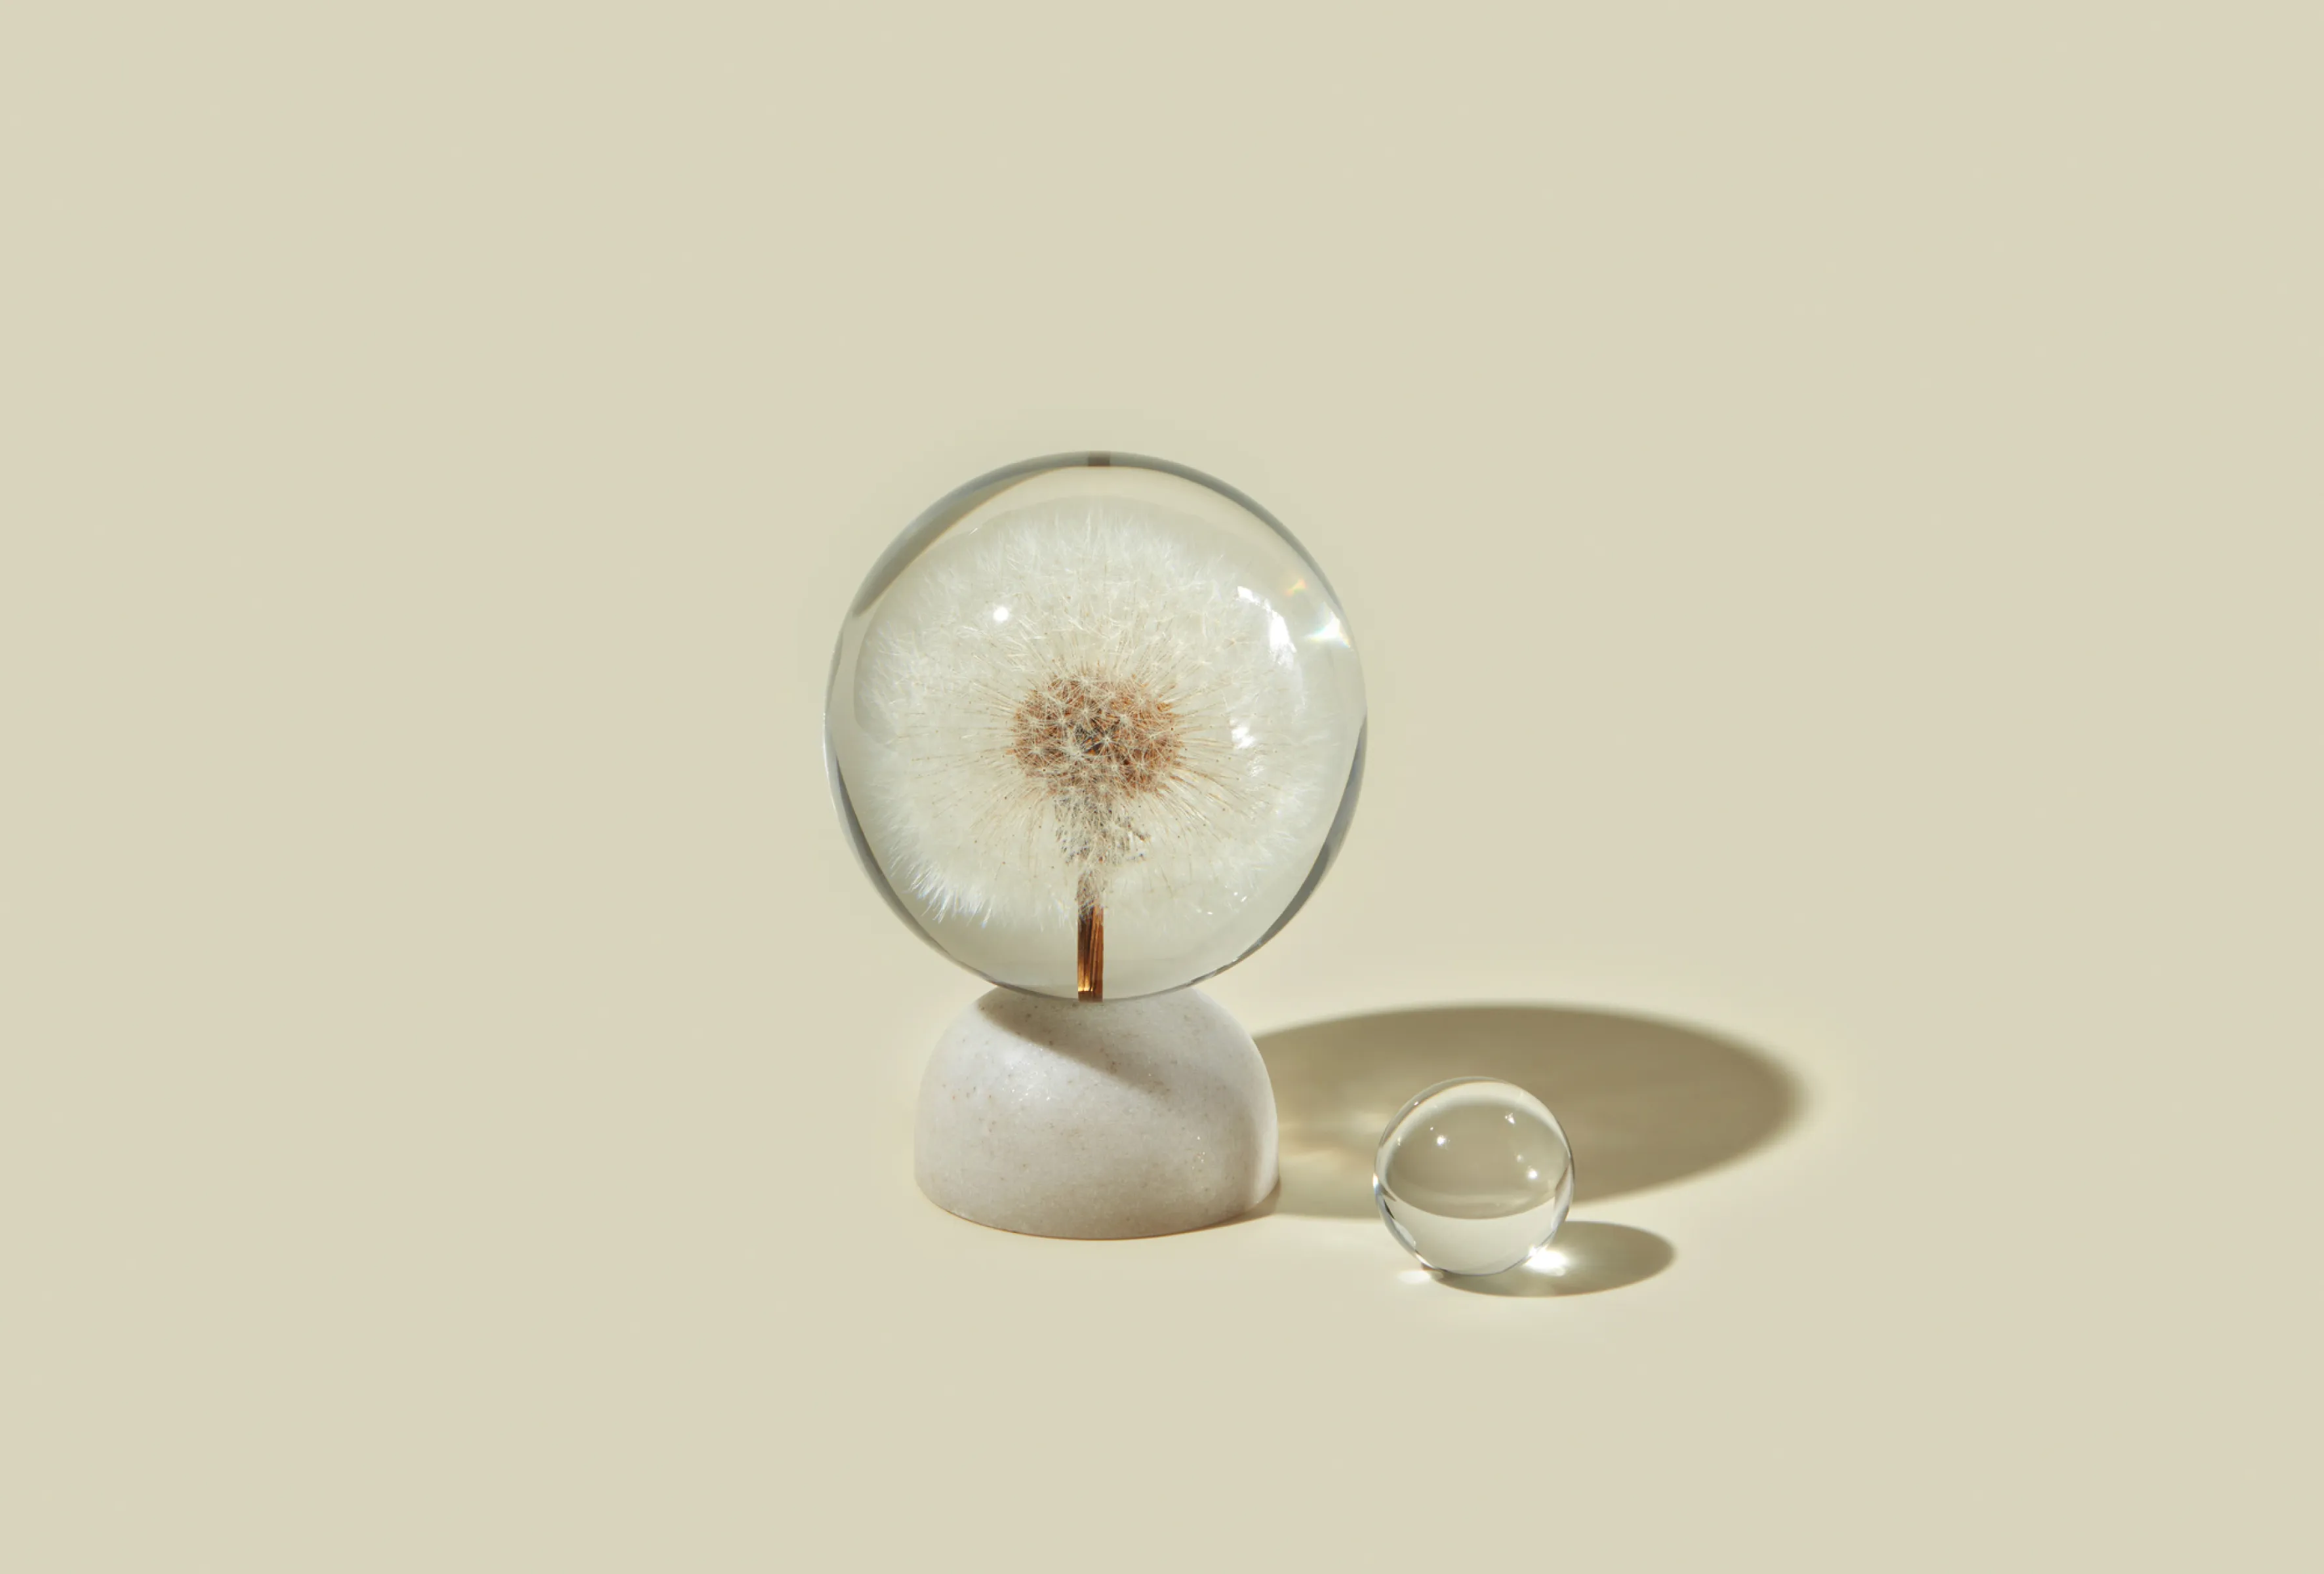 Dandelion seed encased in a glass sphere on a stone with a small orb beside it.